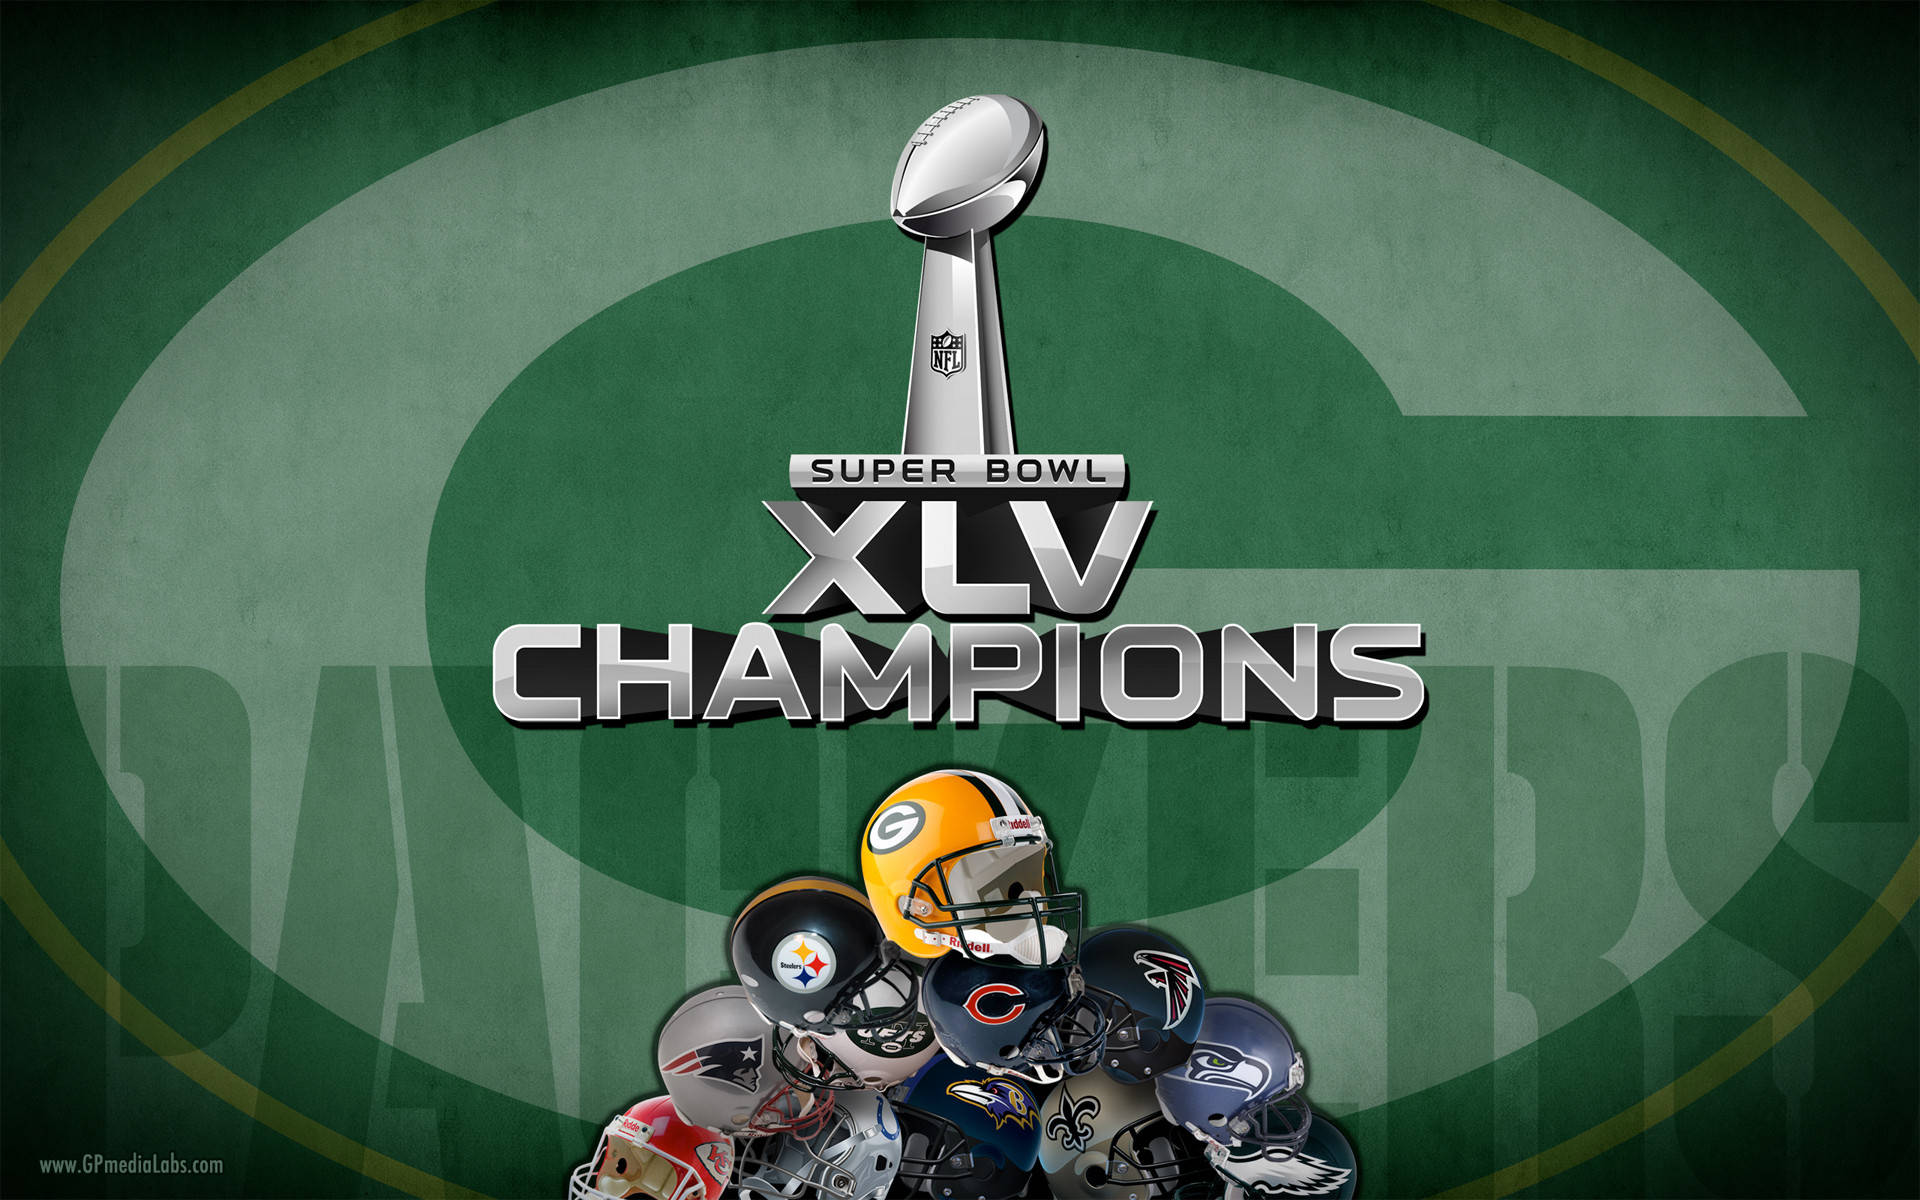 Green Bay Packers Super Bowl Champions Background